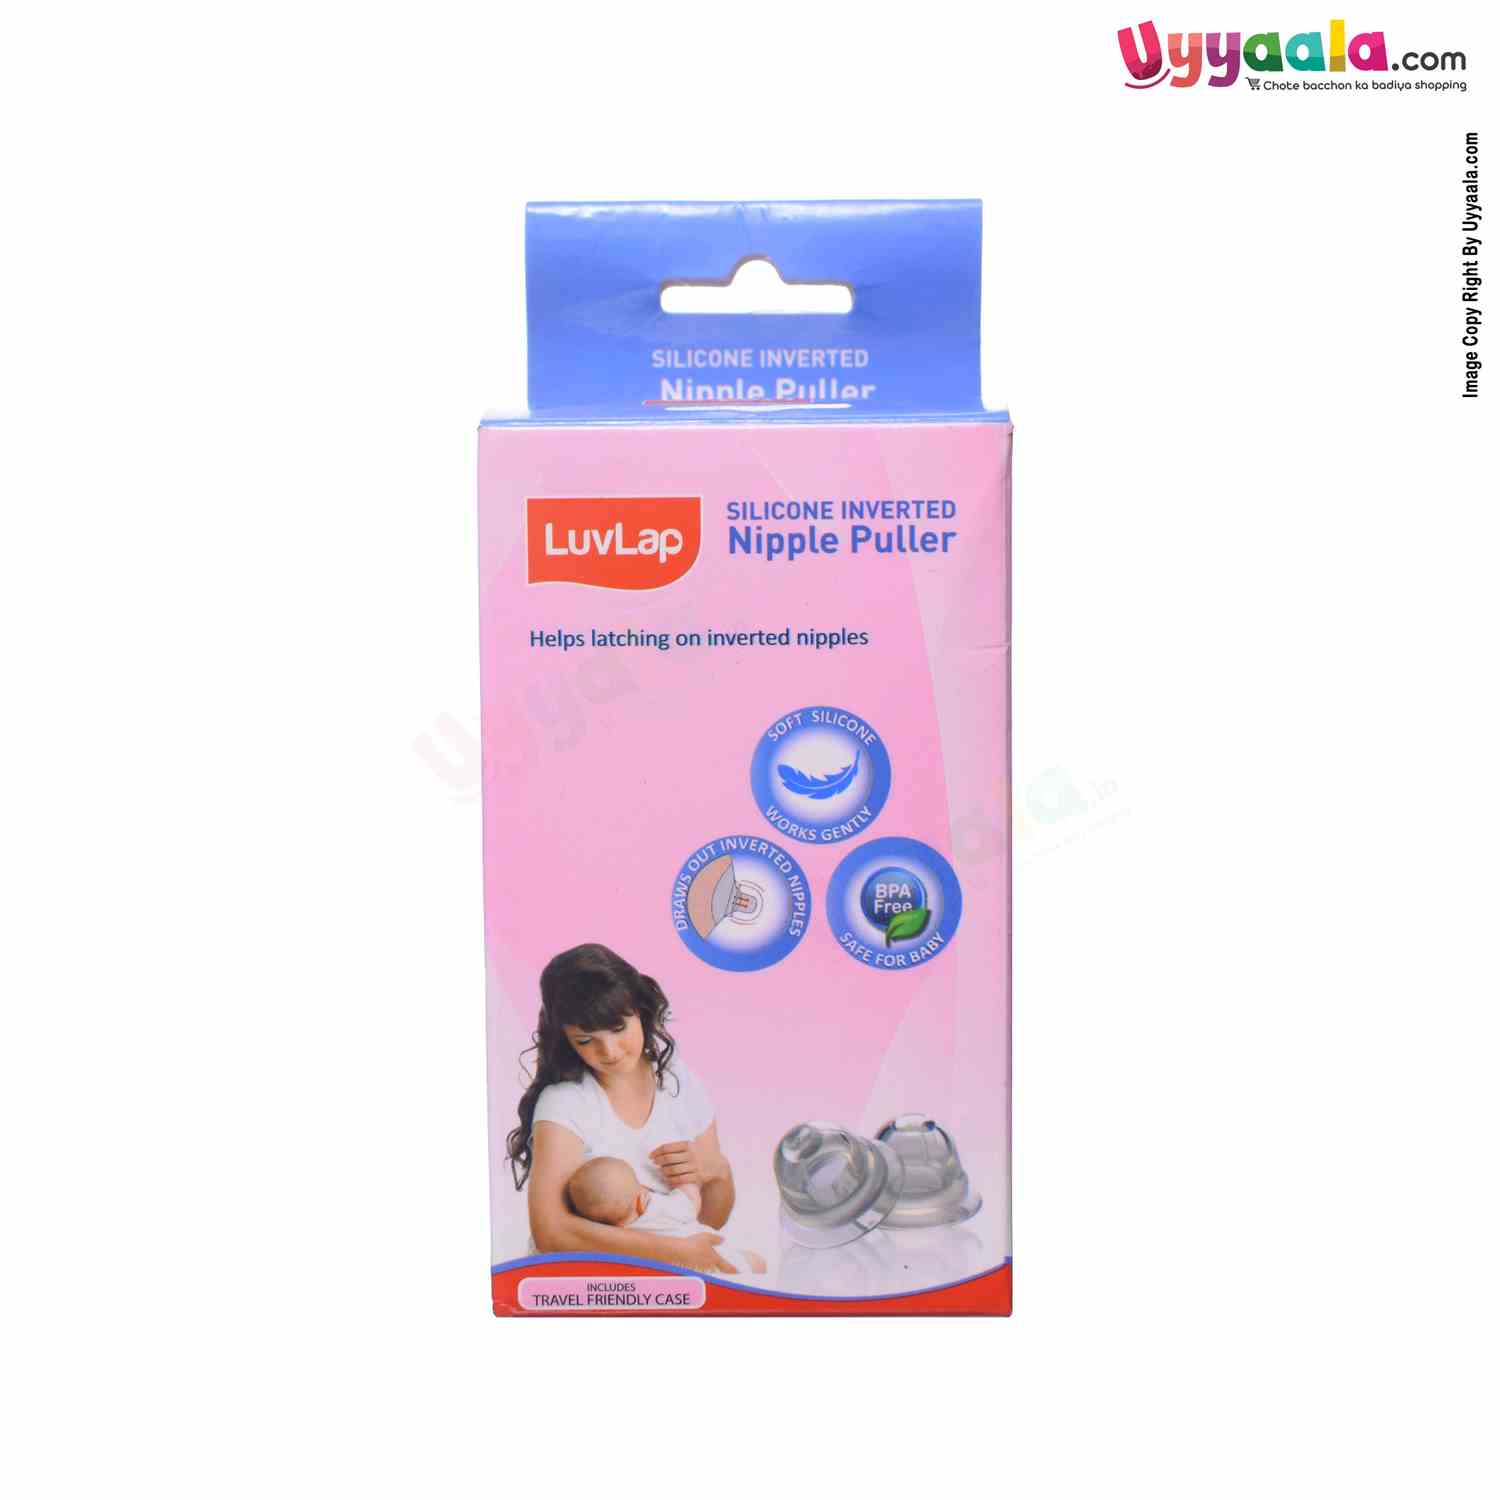 LUVLAP Silicon Inverted Nipple Puller